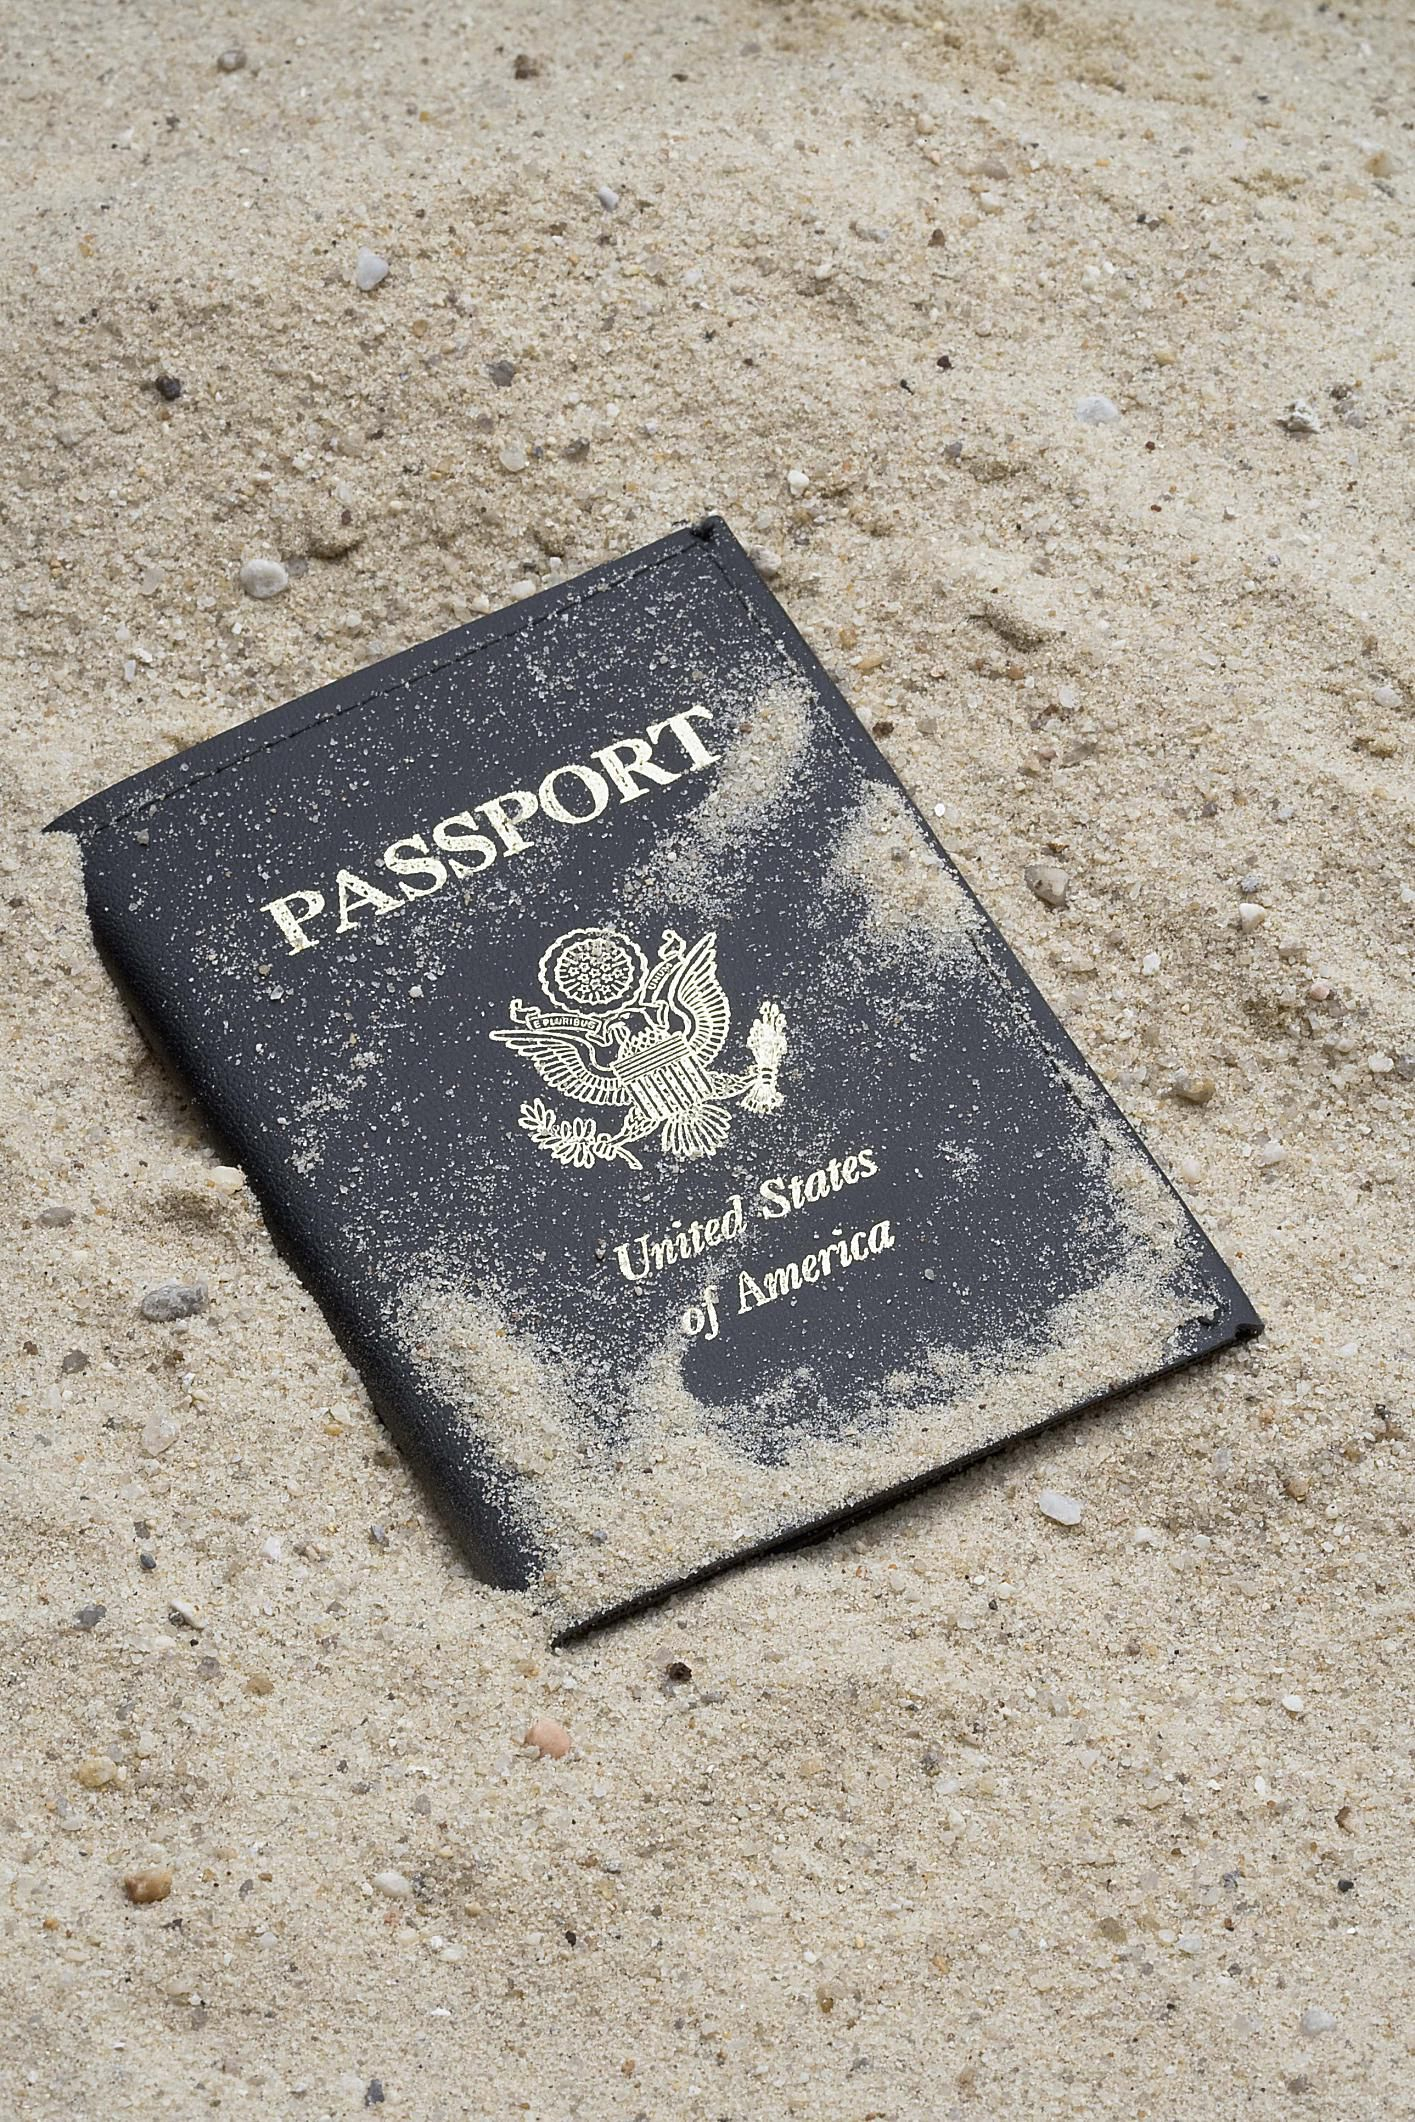 How To Replace A Lost Or Stolen Passport Abroad